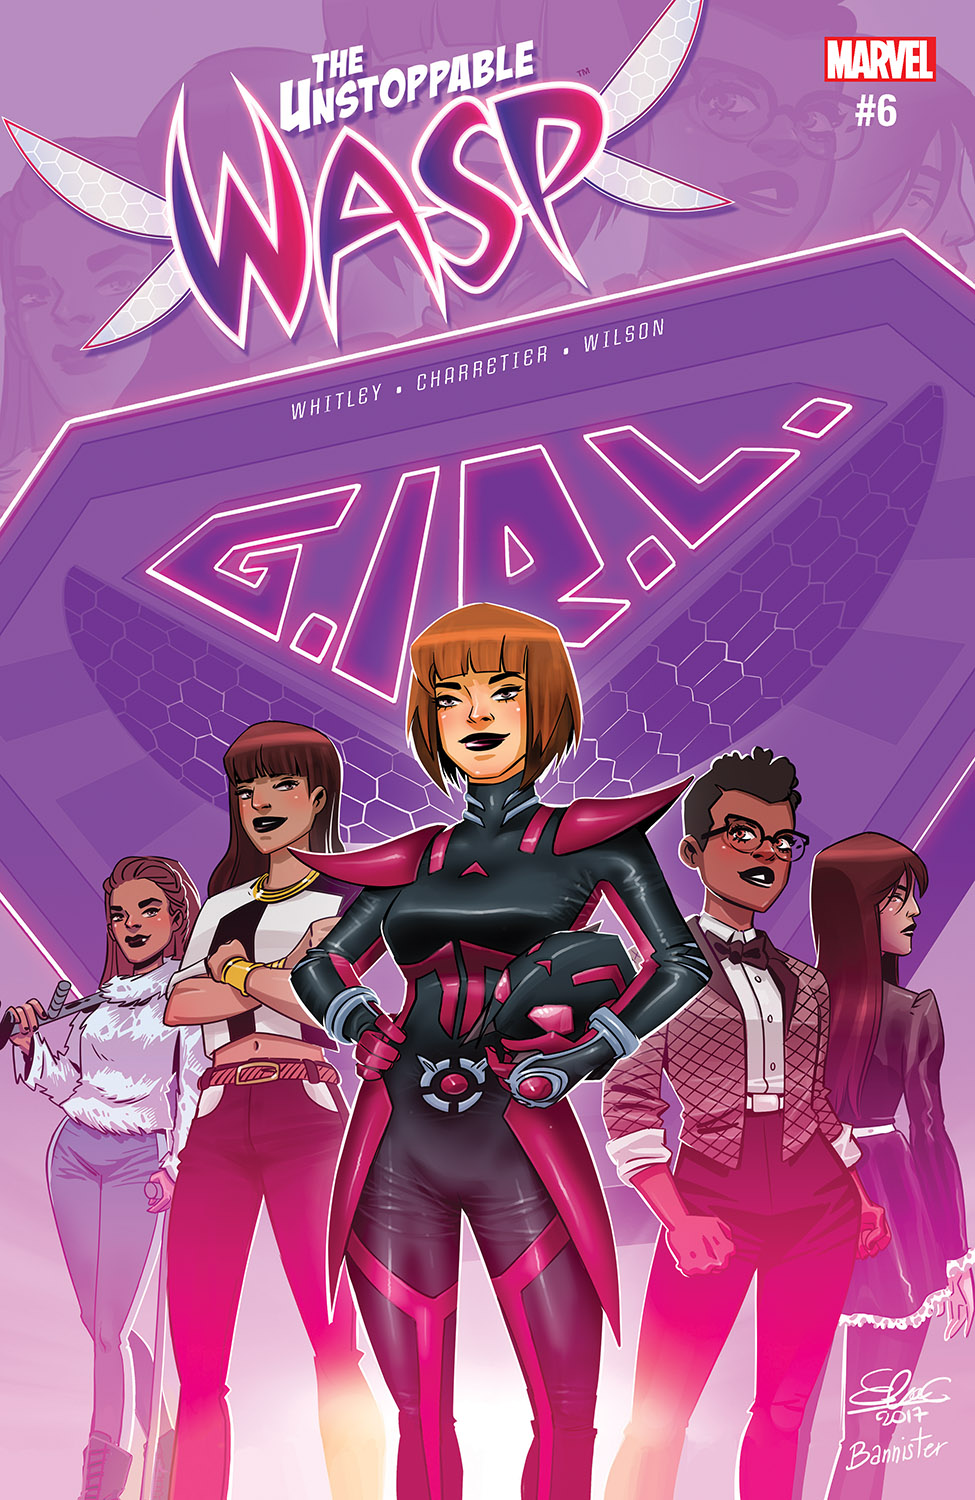 The Unstoppable Wasp (2017) #6